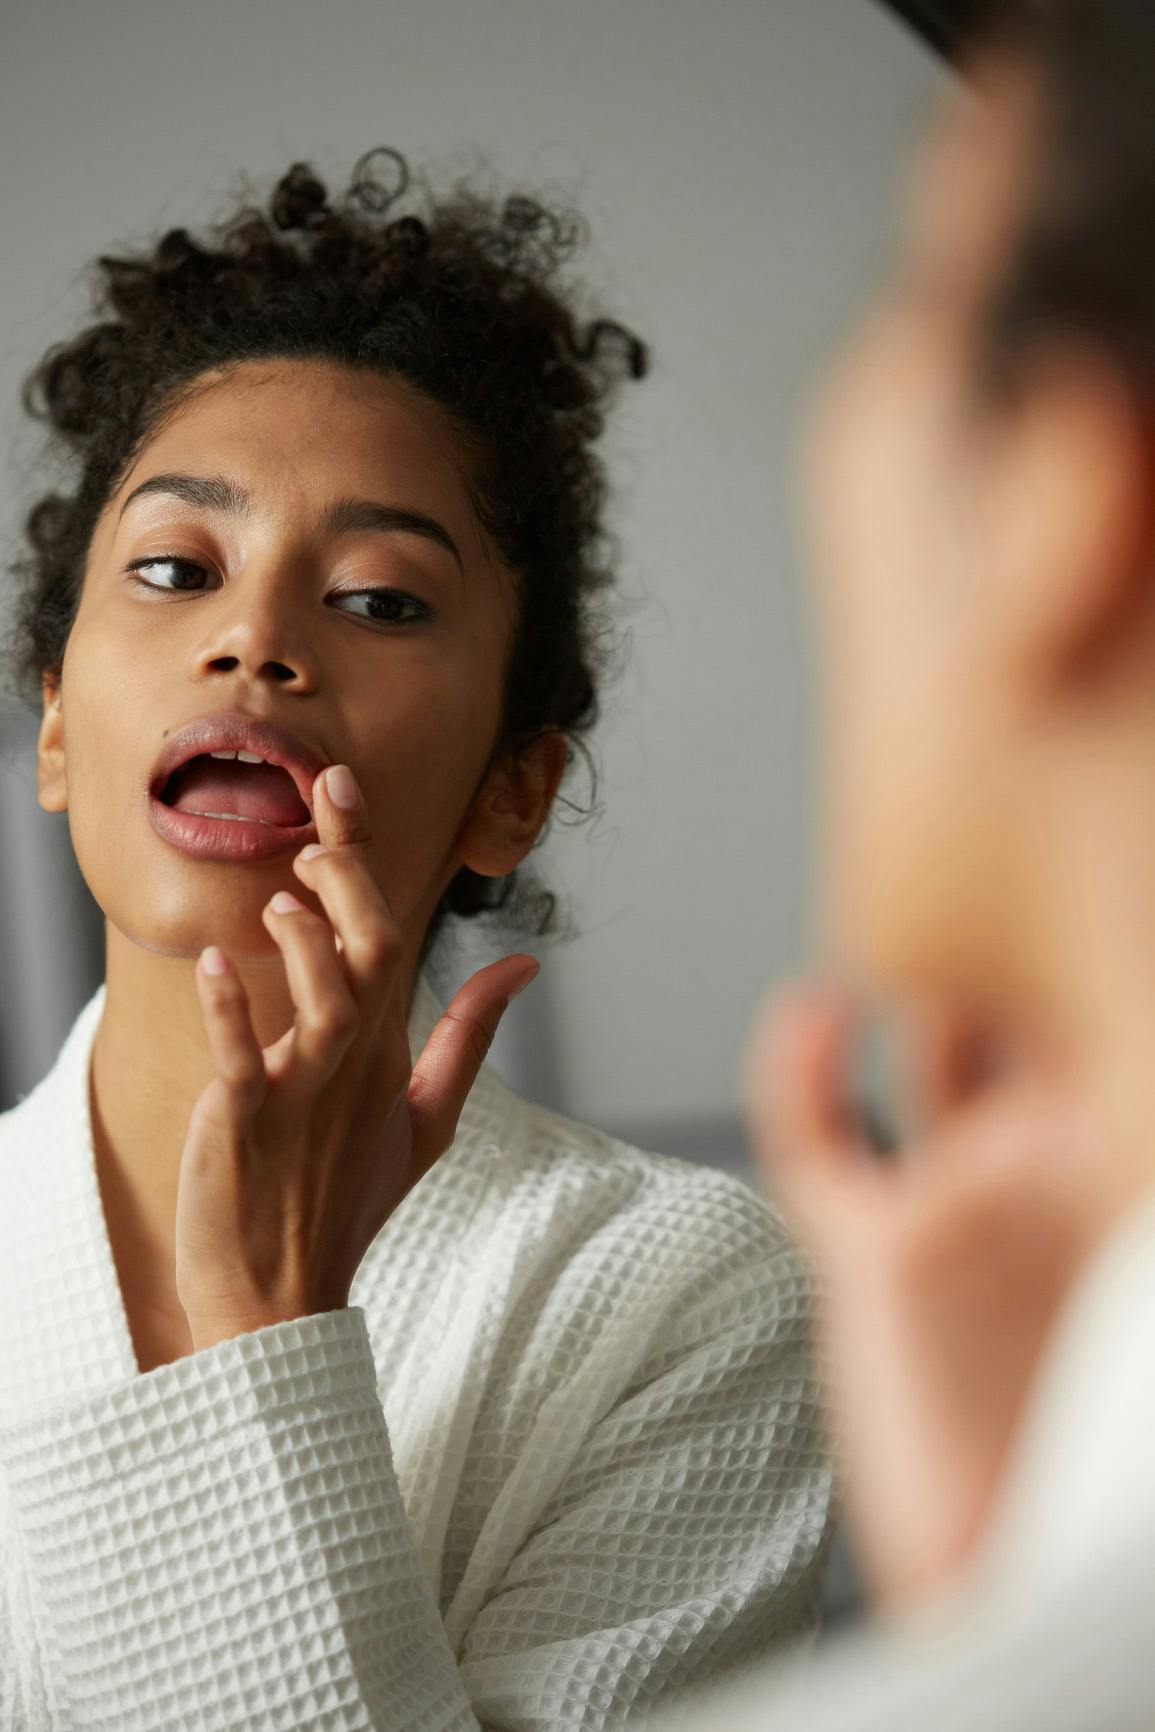 Woman looking closely at her lip in the mirror, which she is touching with her finger